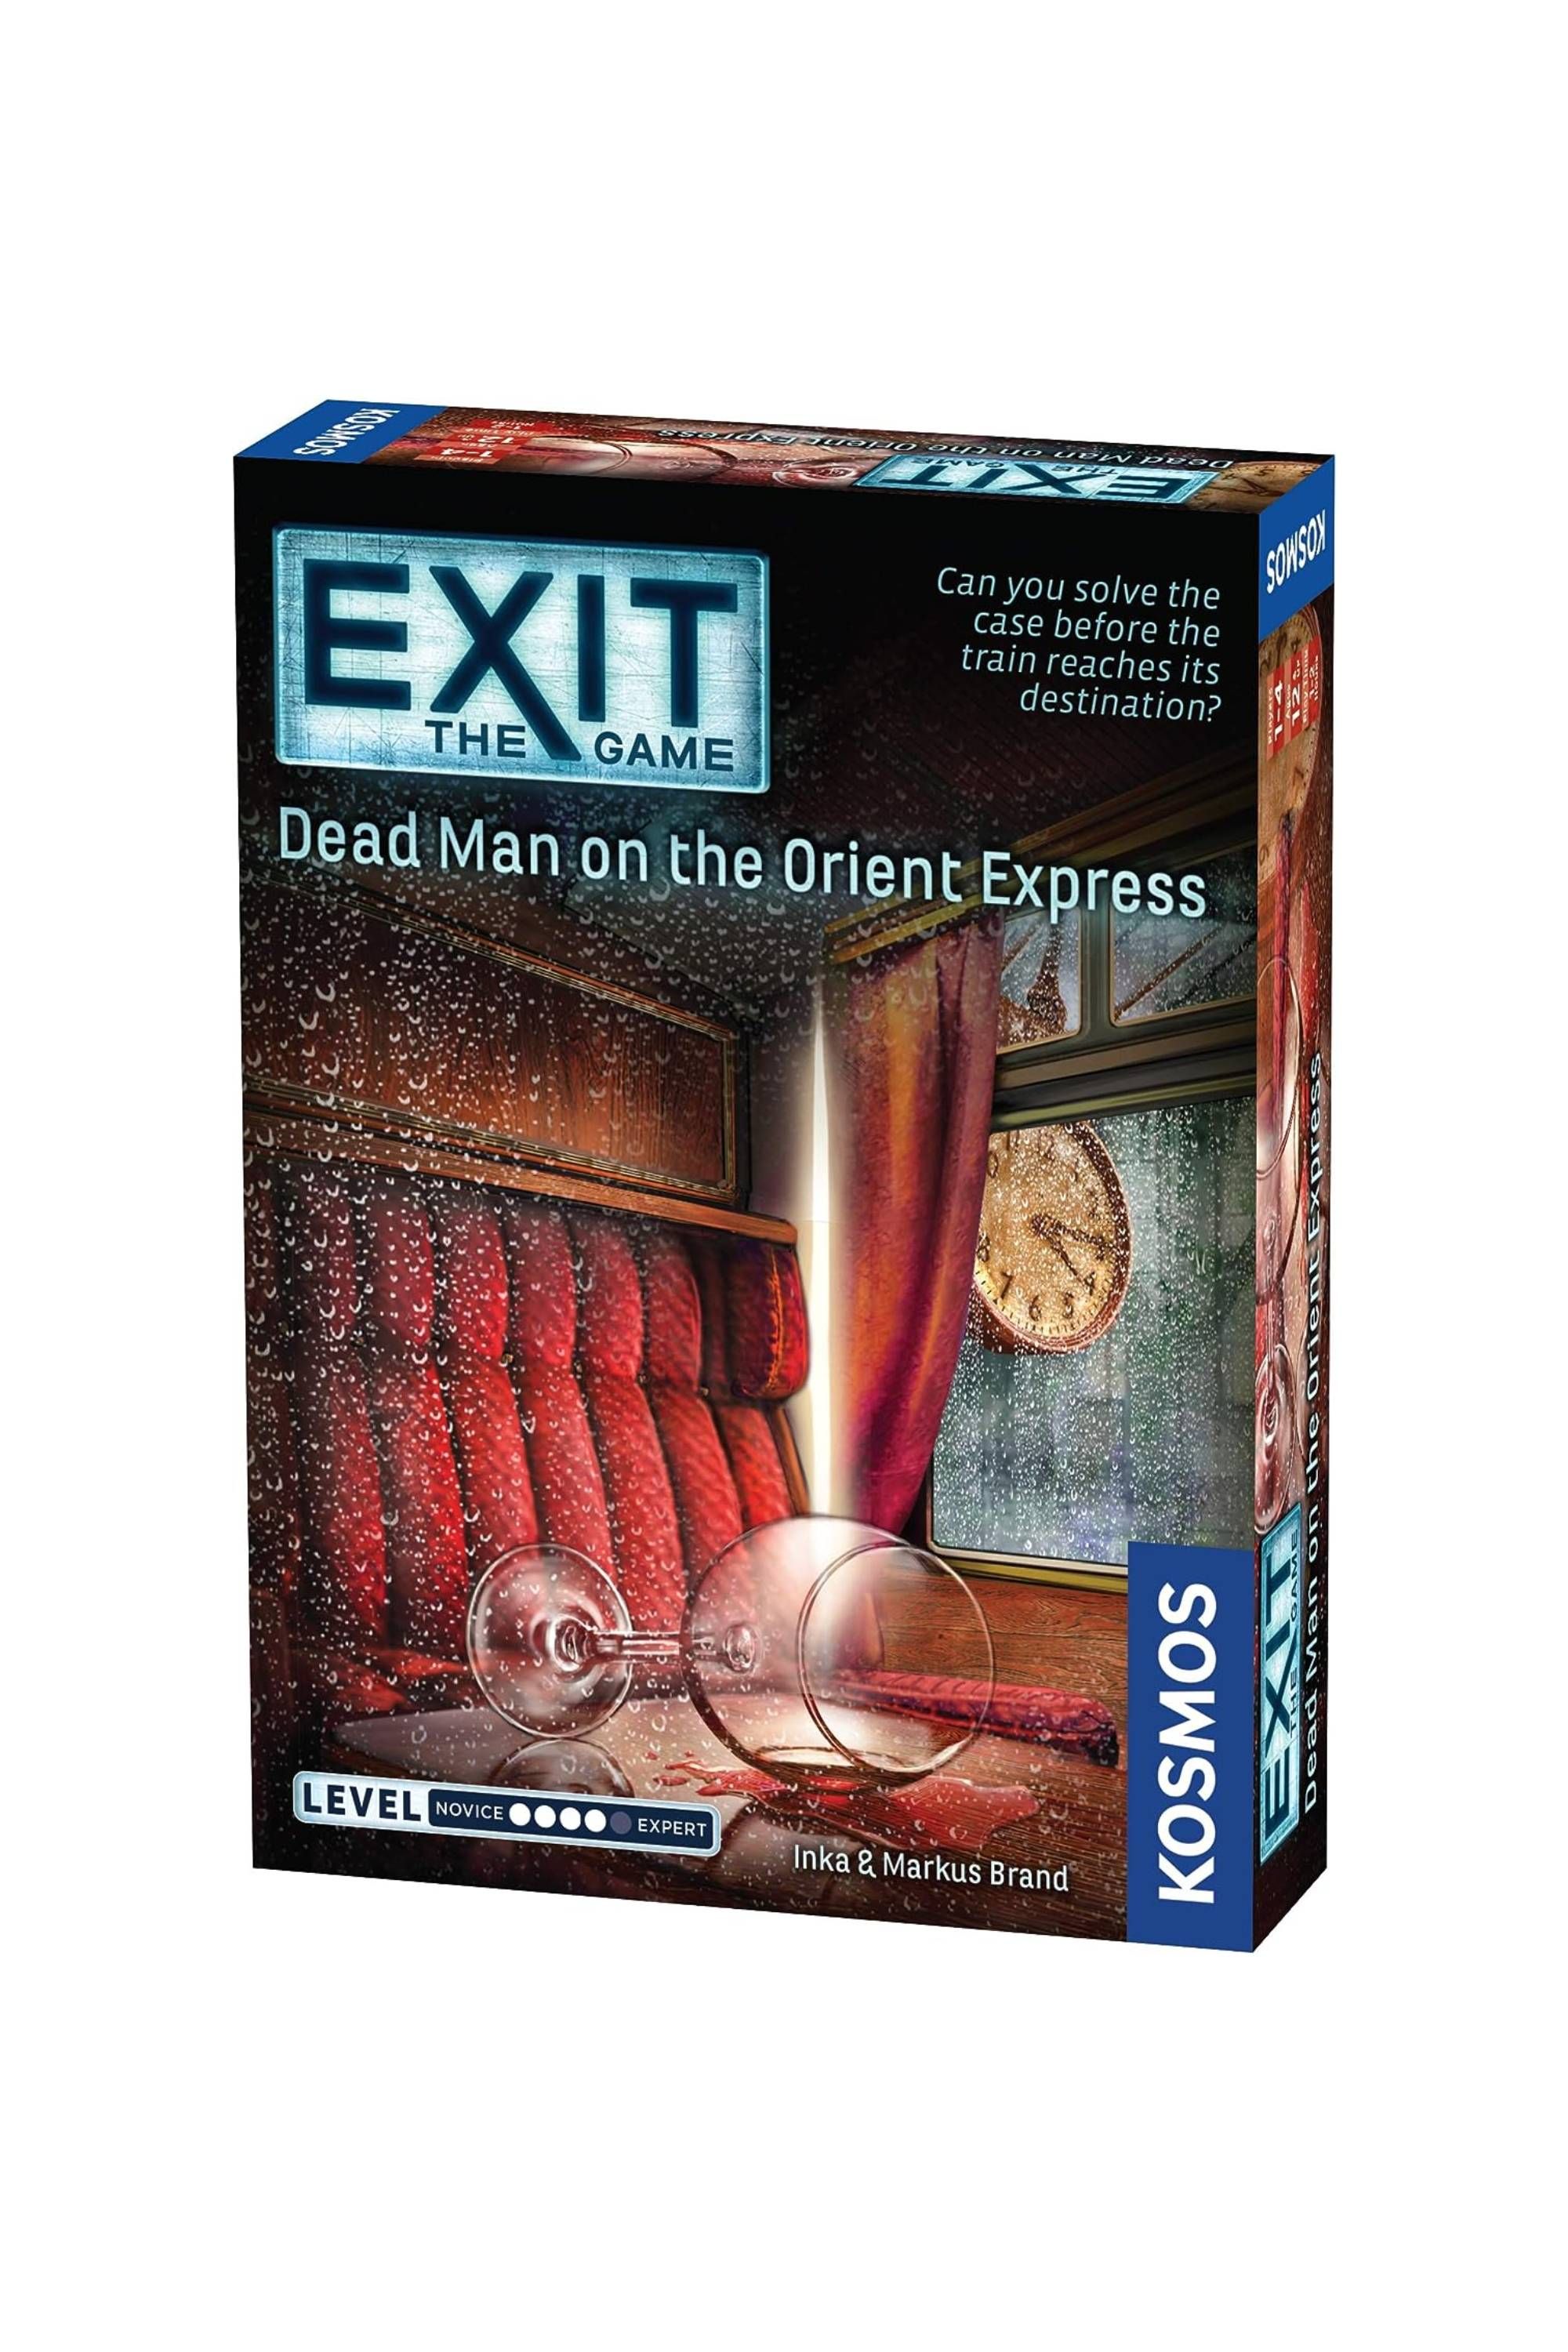 Exit_ The Game – Dead Man on the Orient Express